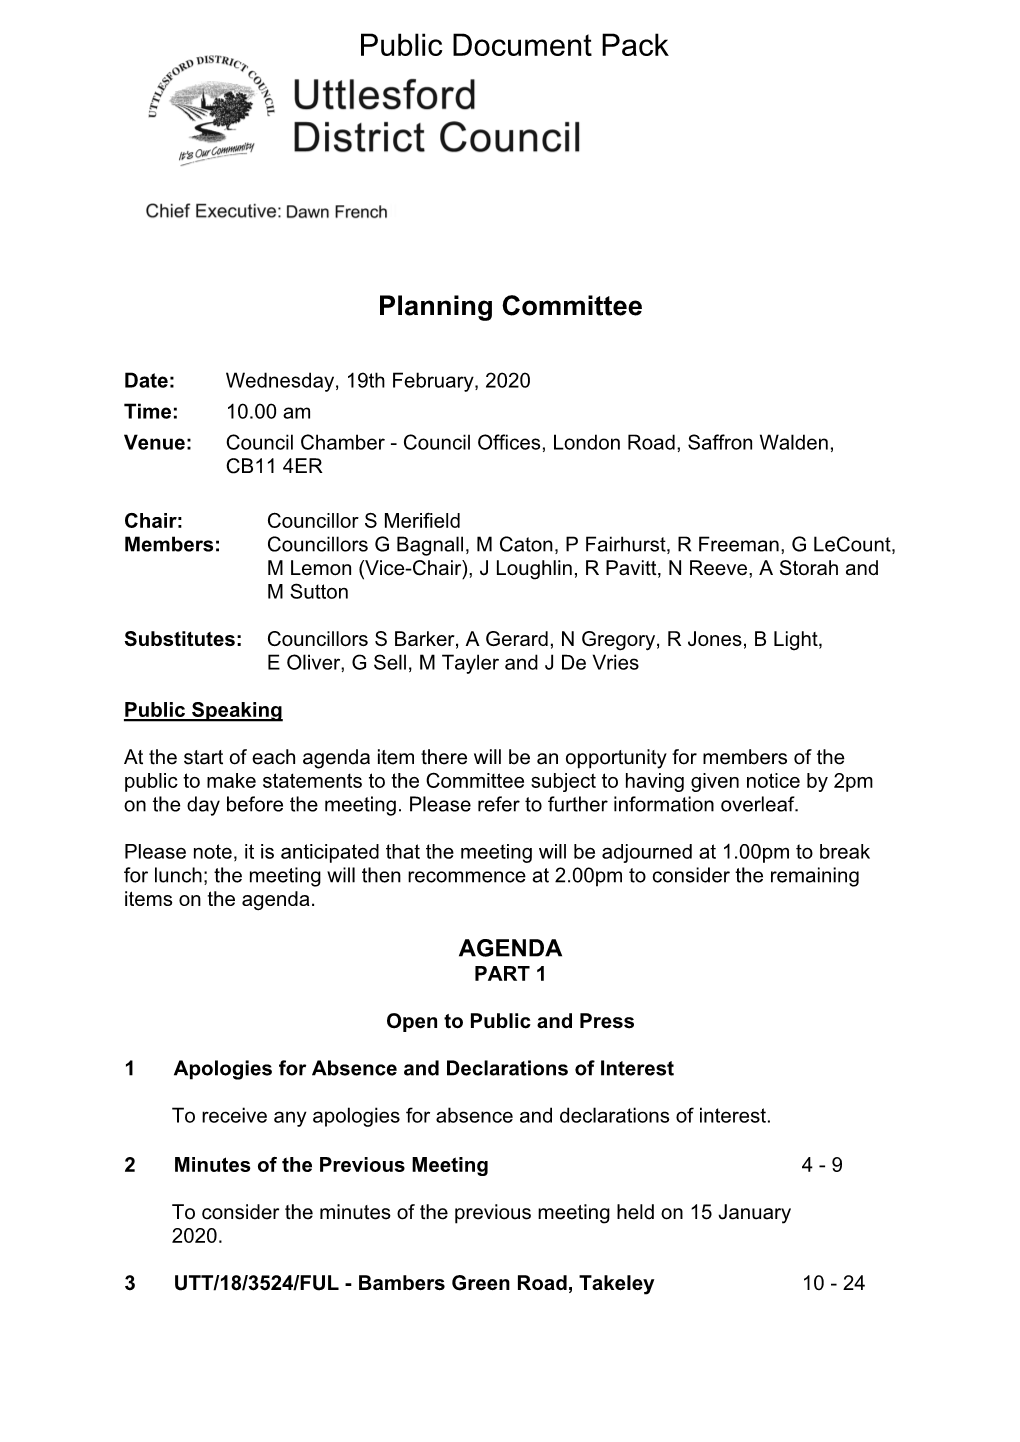 (Public Pack)Agenda Document for Planning Committee, 19/02/2020